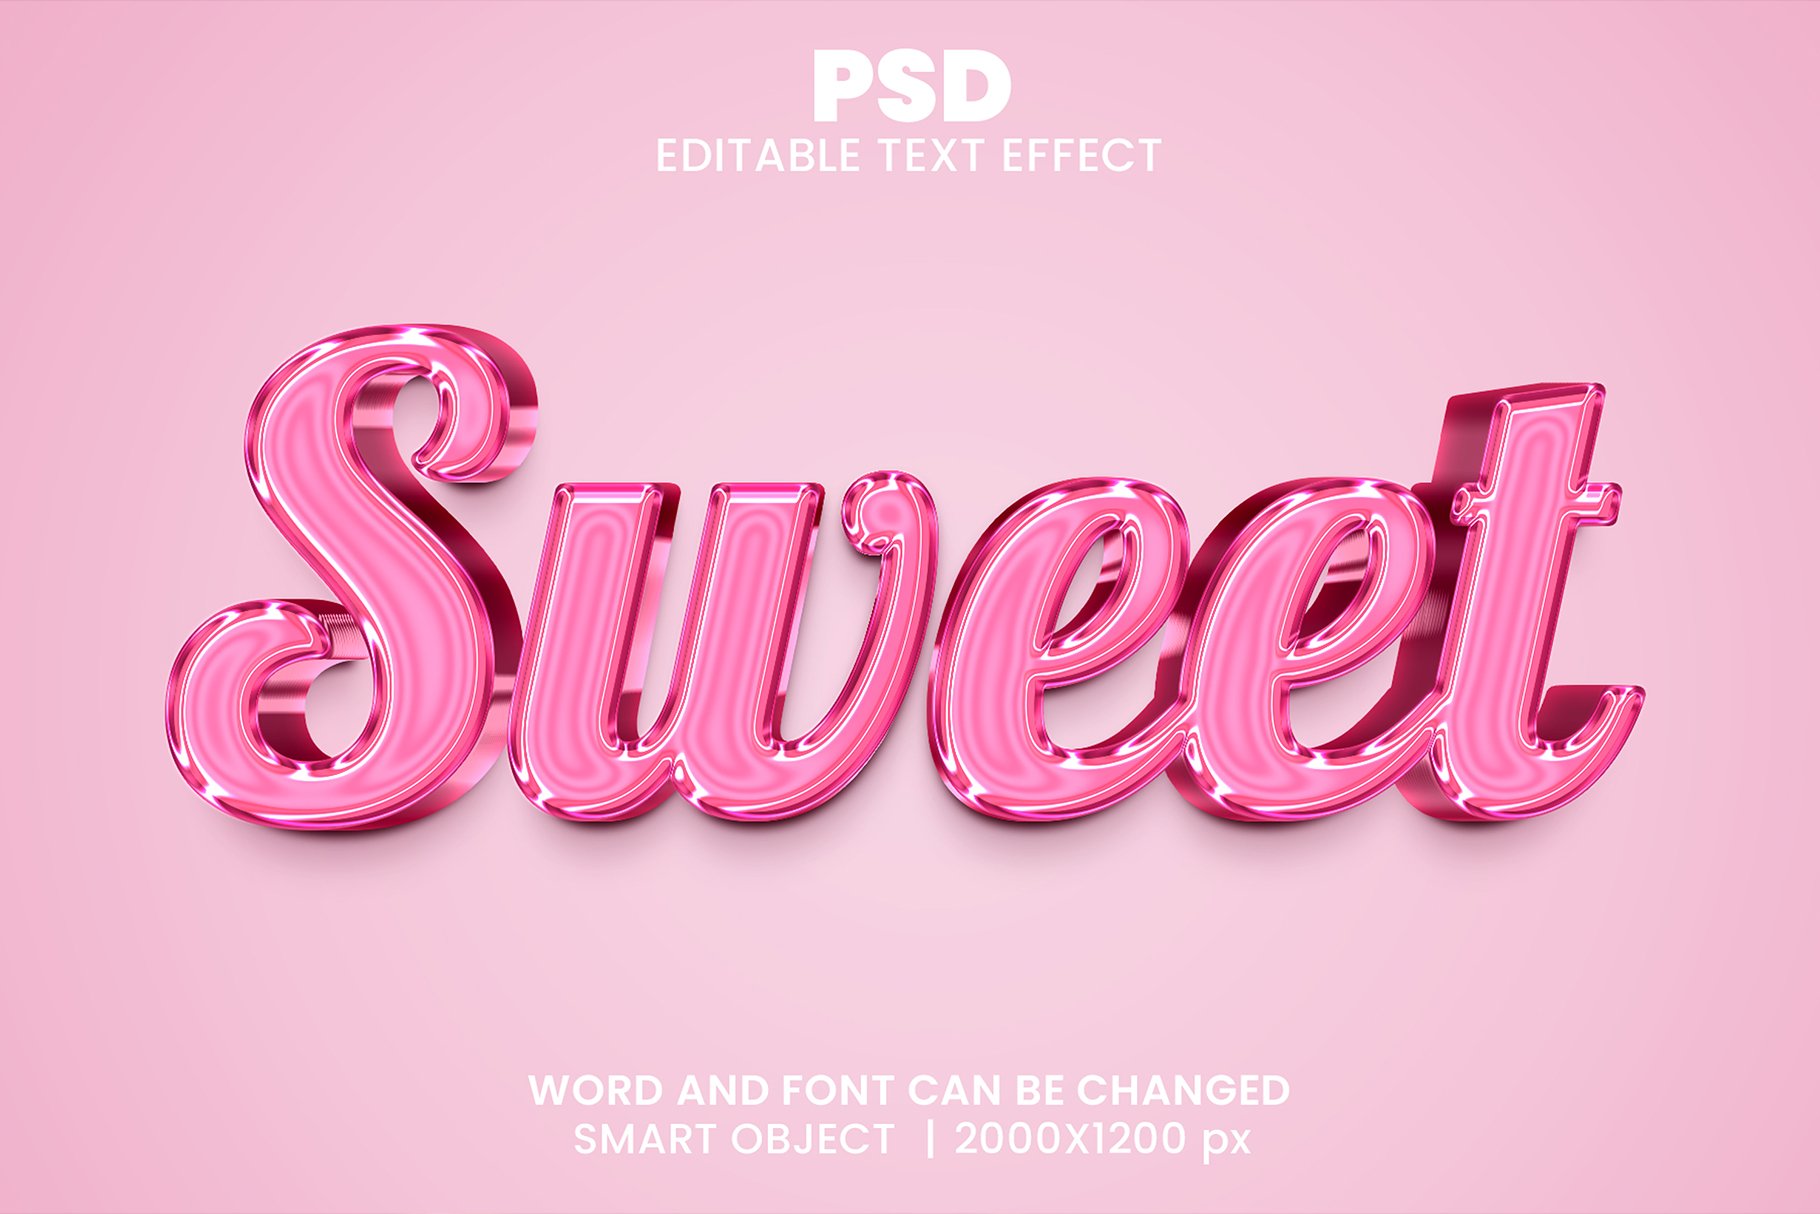 Sweet 3d Editable Text Effect Stylecover image.